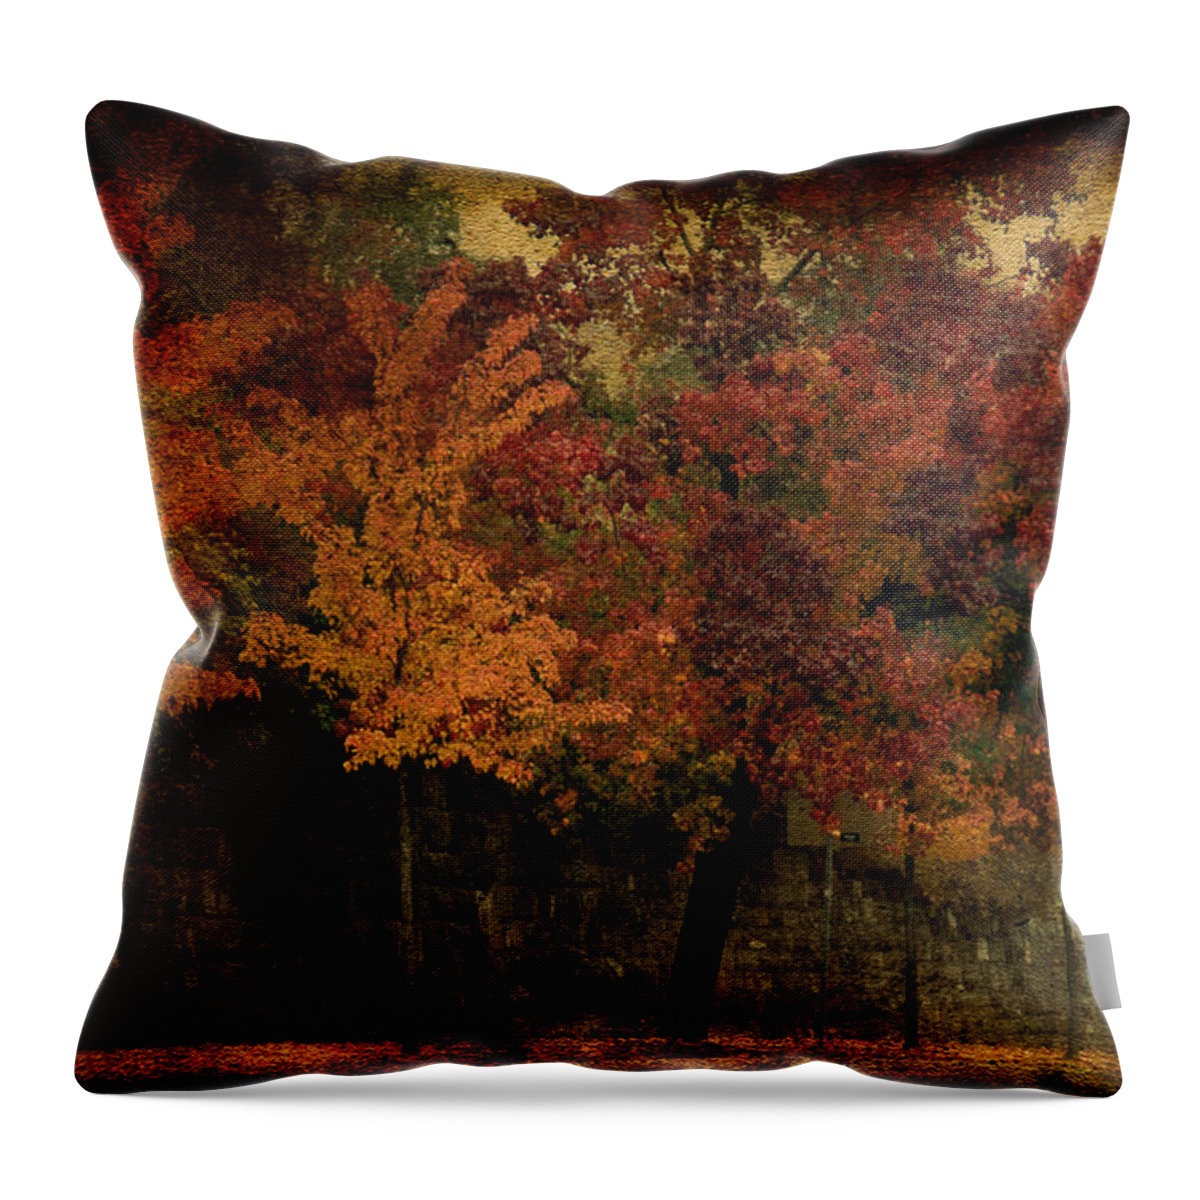 Autumn Throw Pillow featuring the photograph Autumn At The Hill School by Trish Tritz